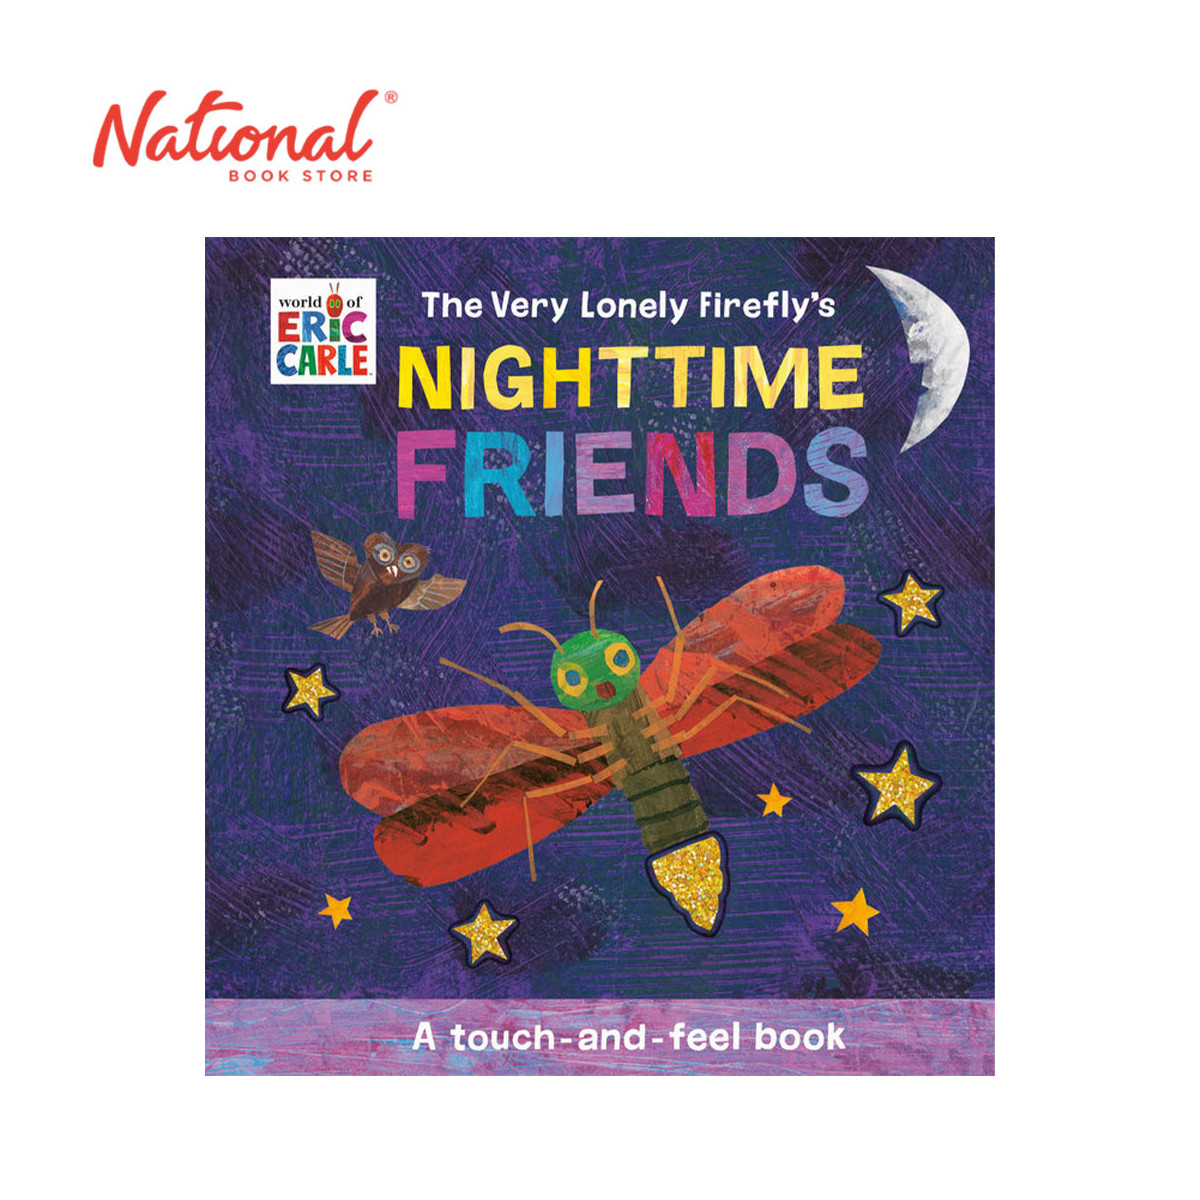 *PRE-ORDER* The Very Lonely Firefly's Nighttime Friends by Eric Carle Board Book - Preschool Books